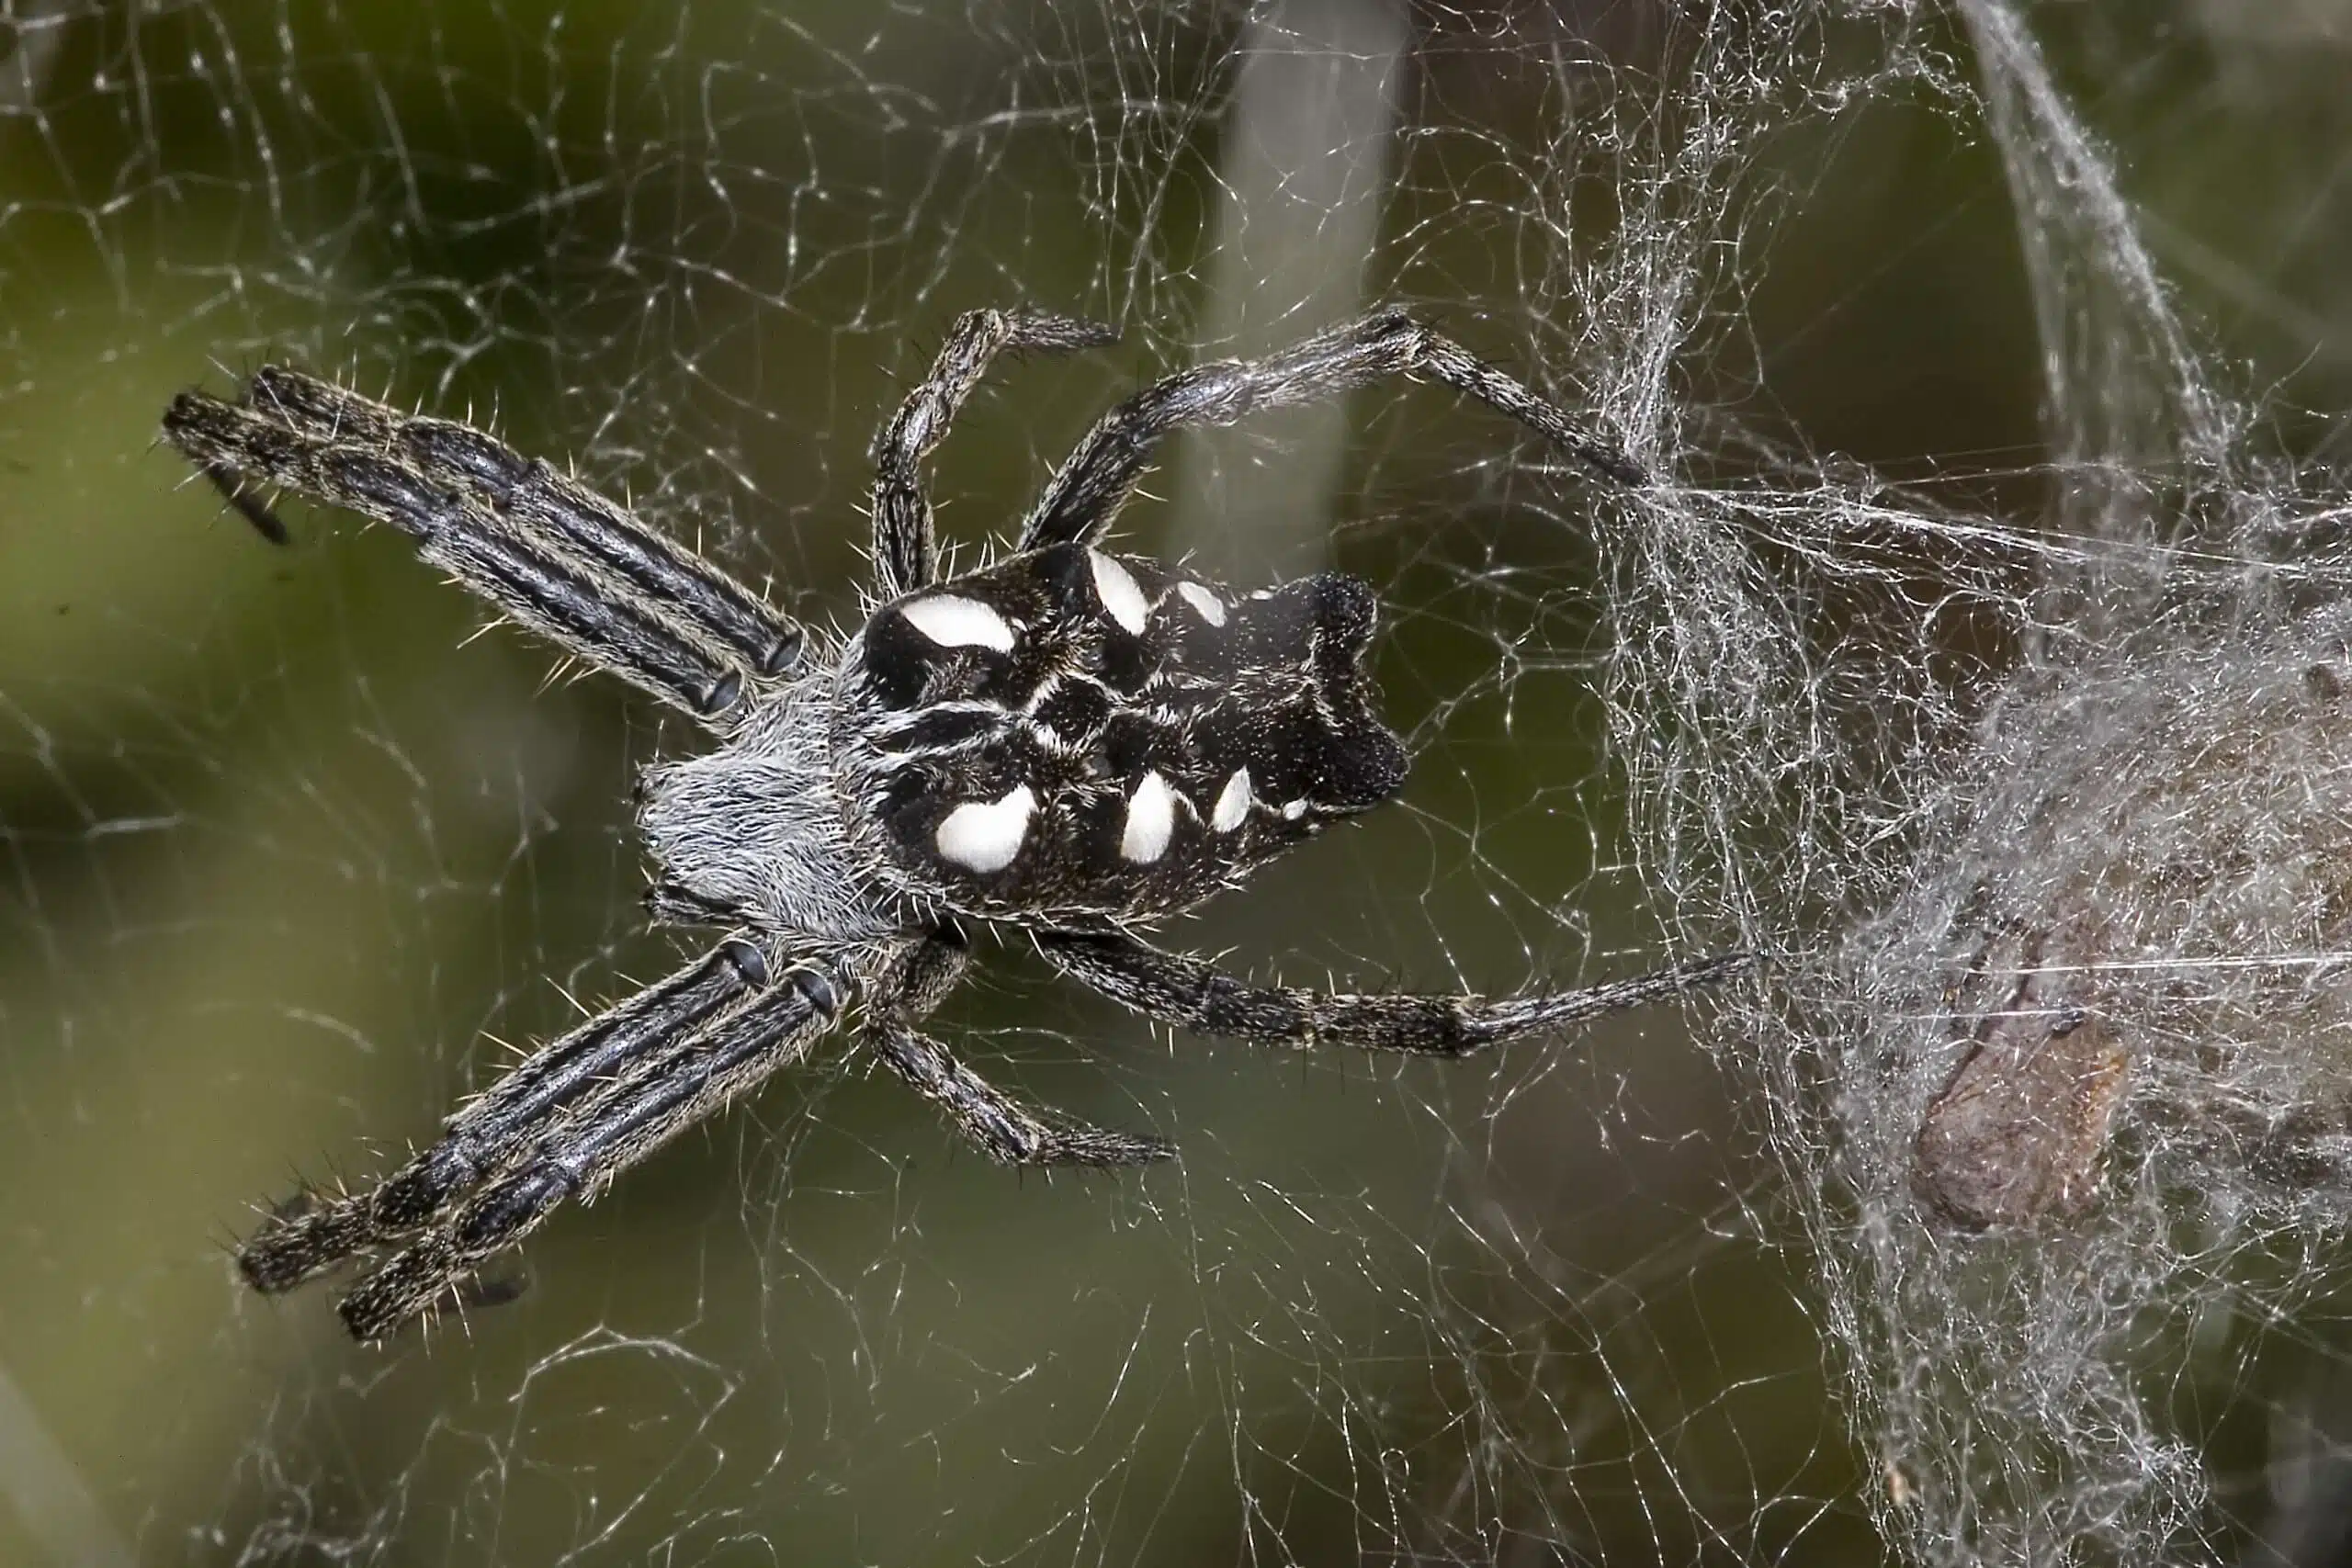 These spiders live in "communes" with the help of which they make large webs - which trap the various pests. Photo: Olaf Leillinger, CC BY-SA 2.5